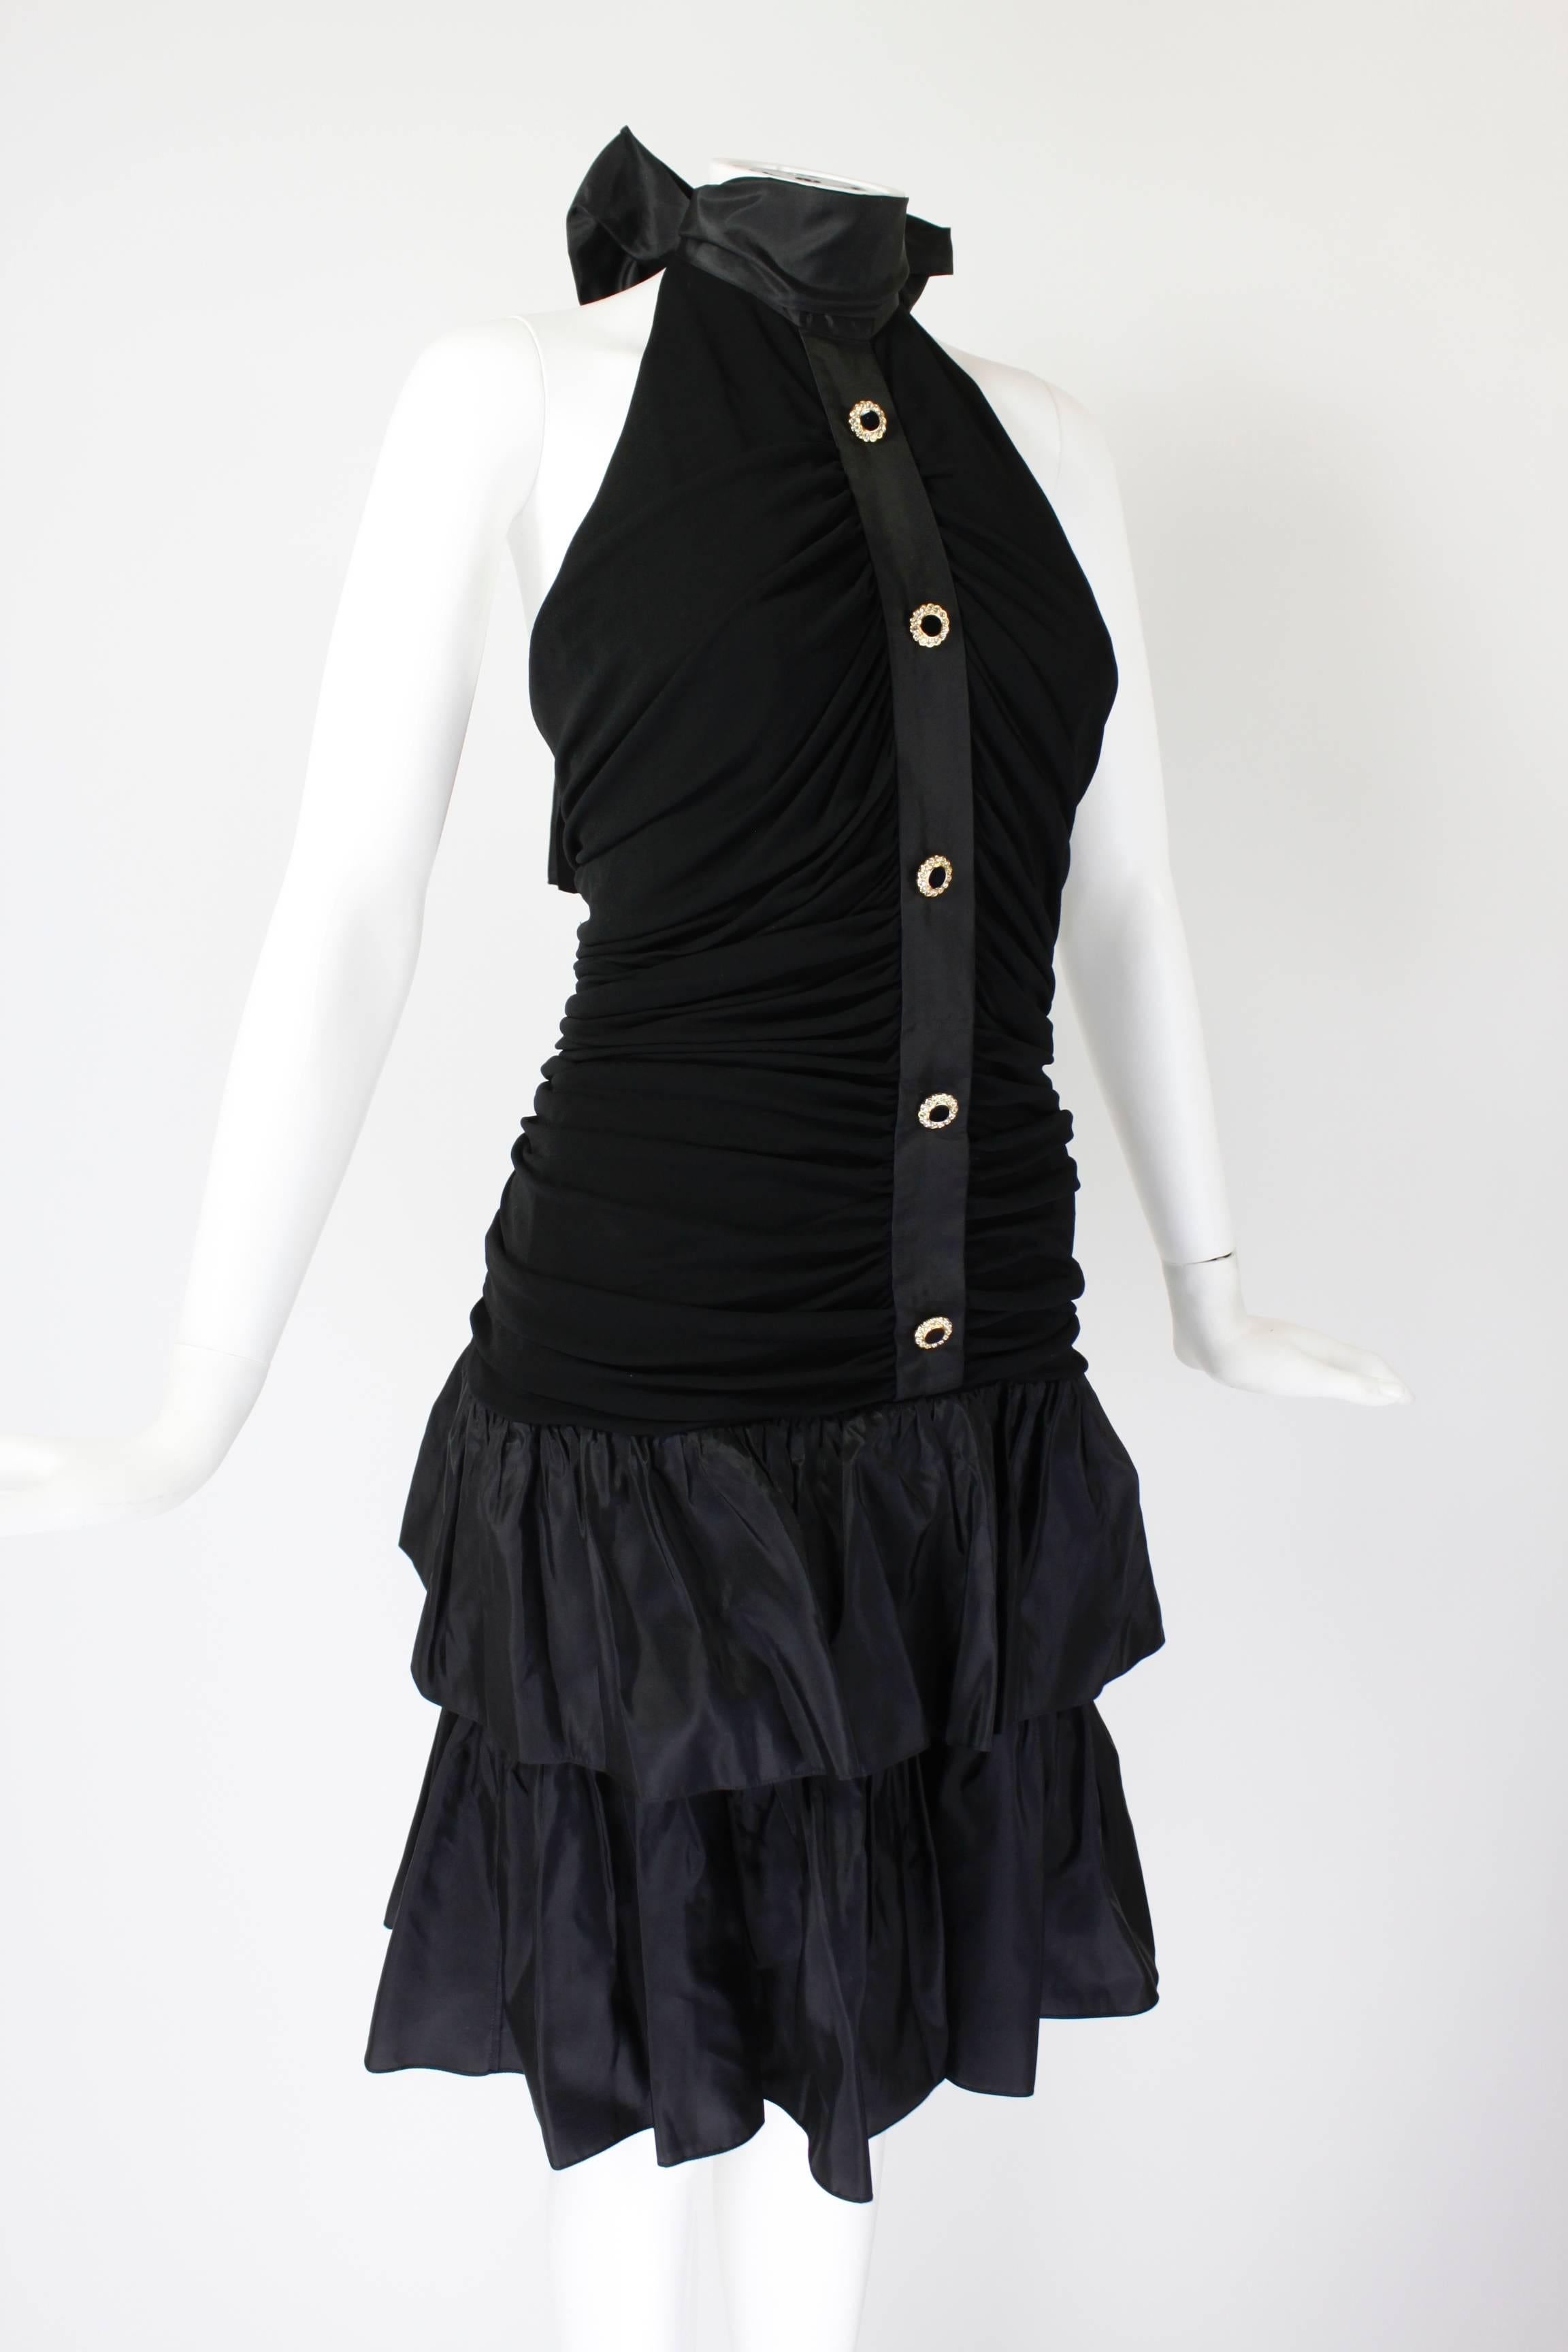 1980s Givenchy Black Ruched Cocktail Dress with Rhinestone Buttons 2